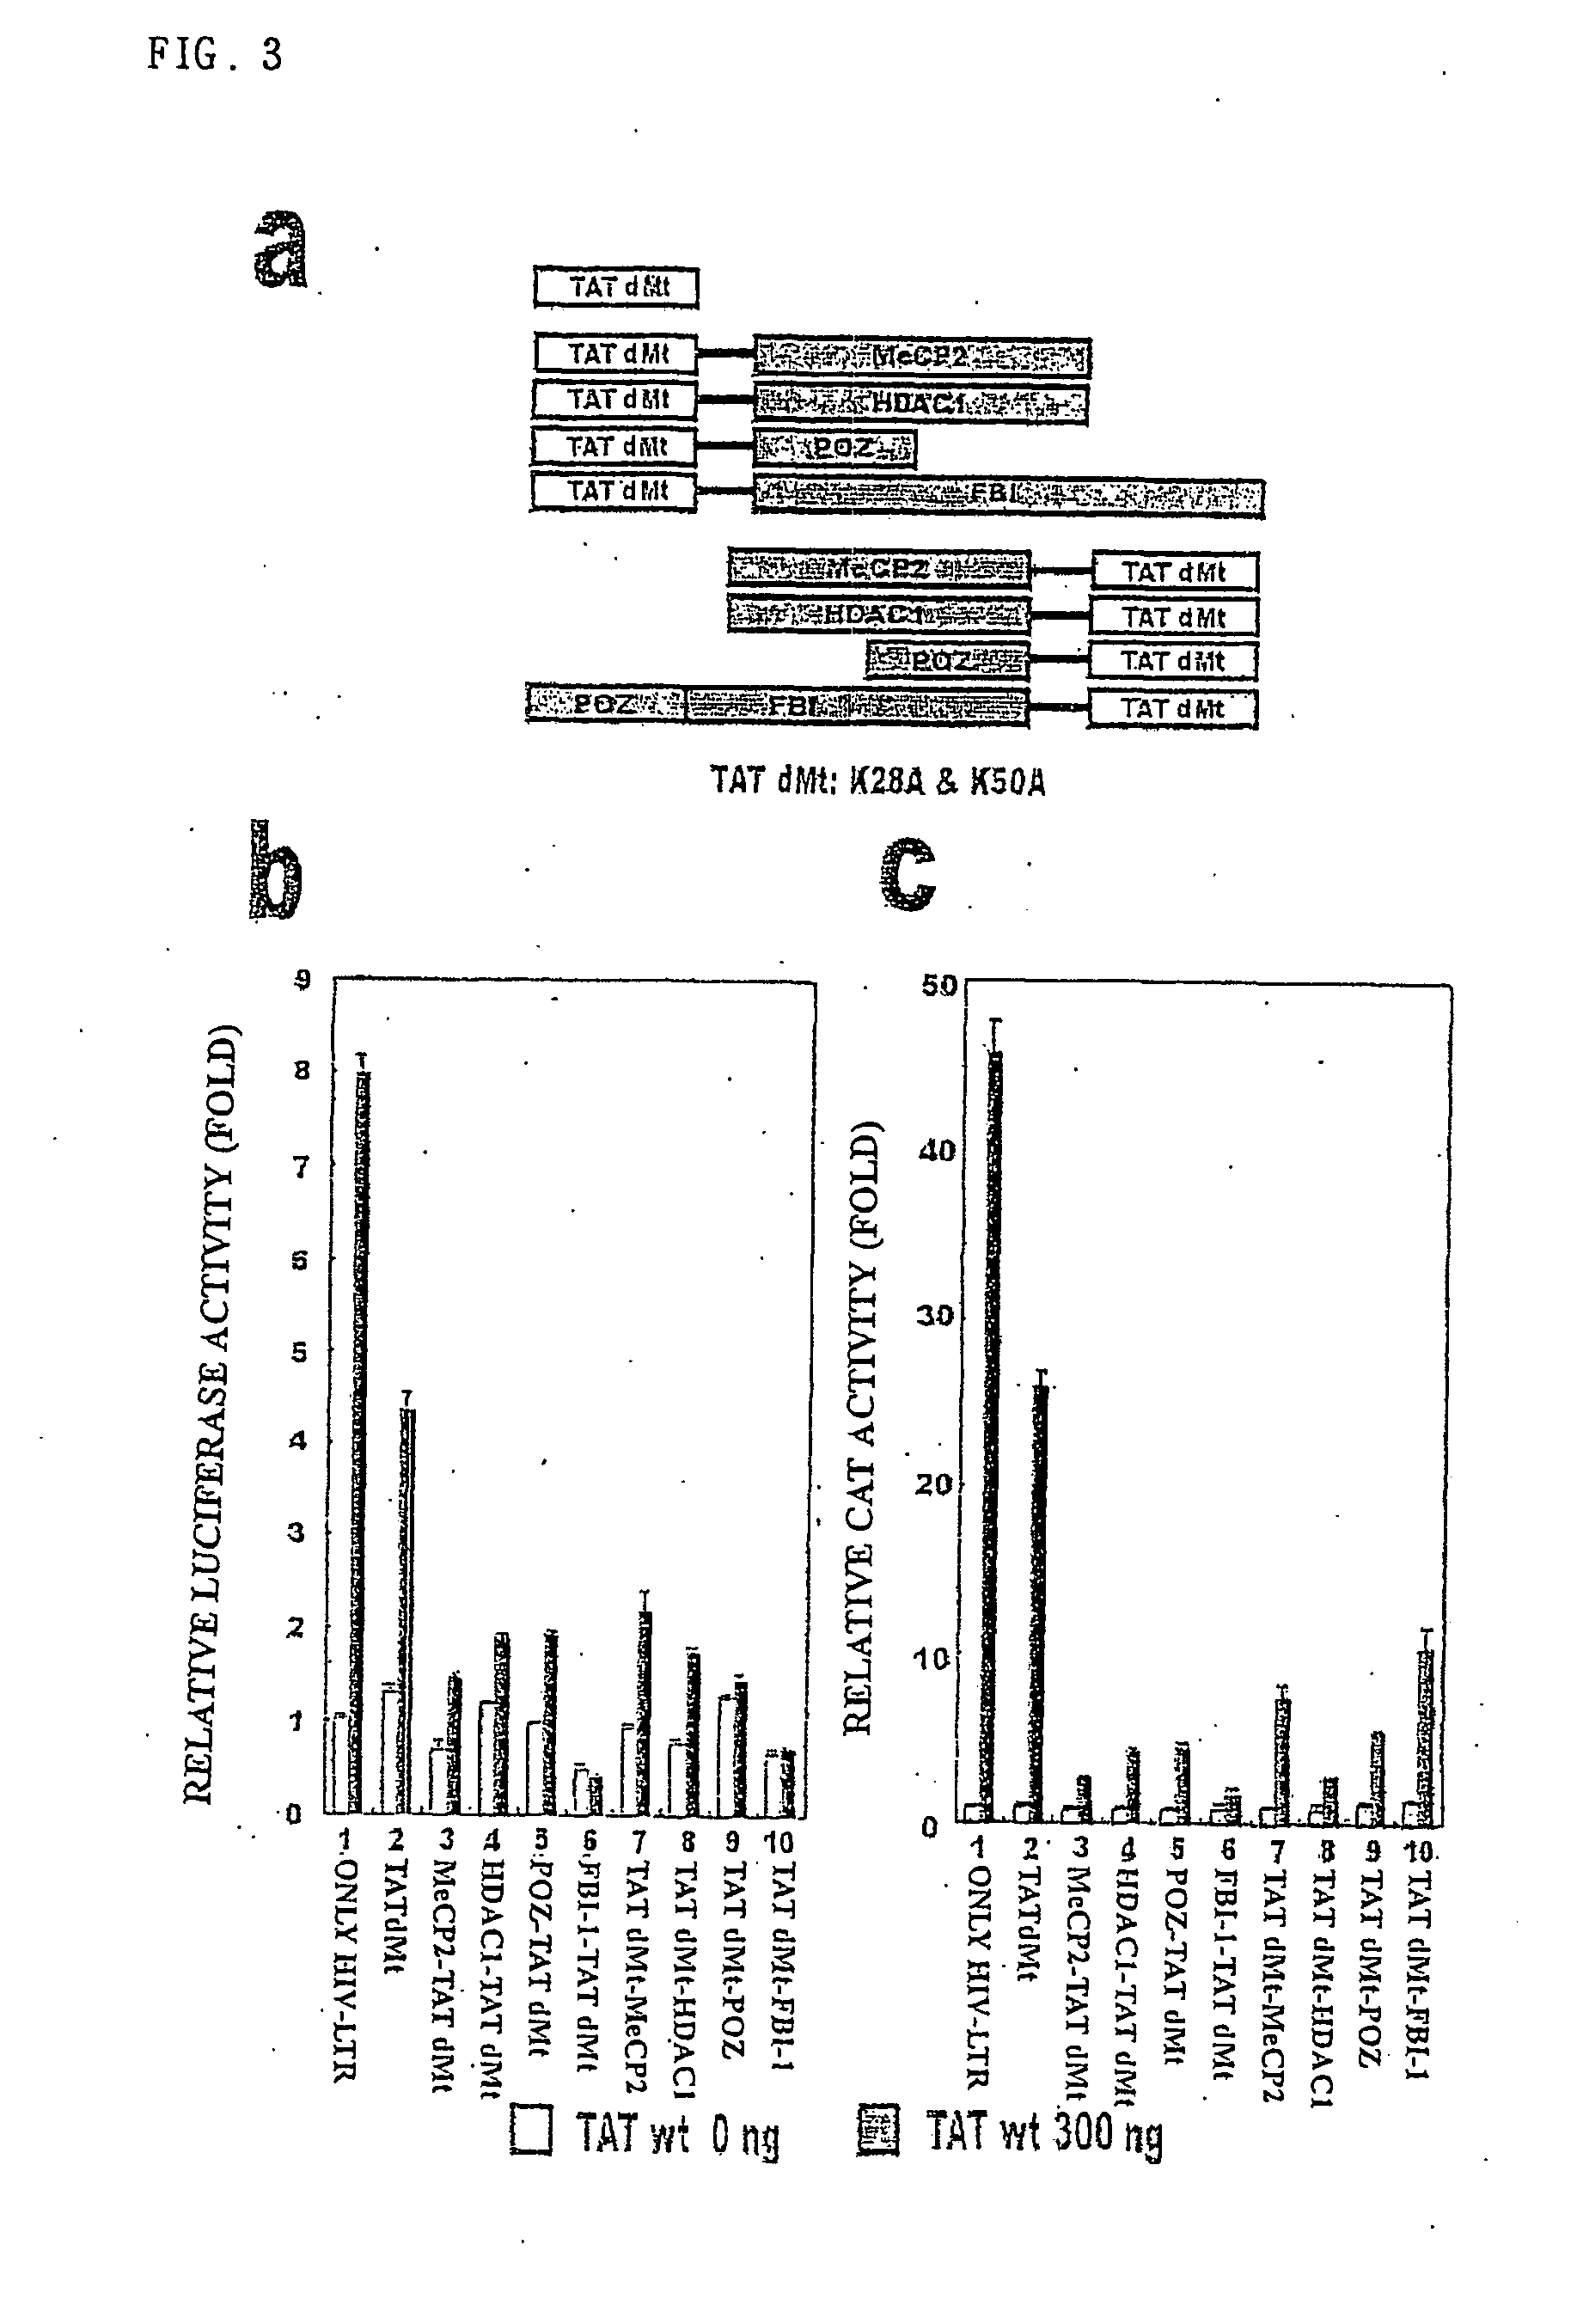 Repressors for hiv transcription and methods thereof